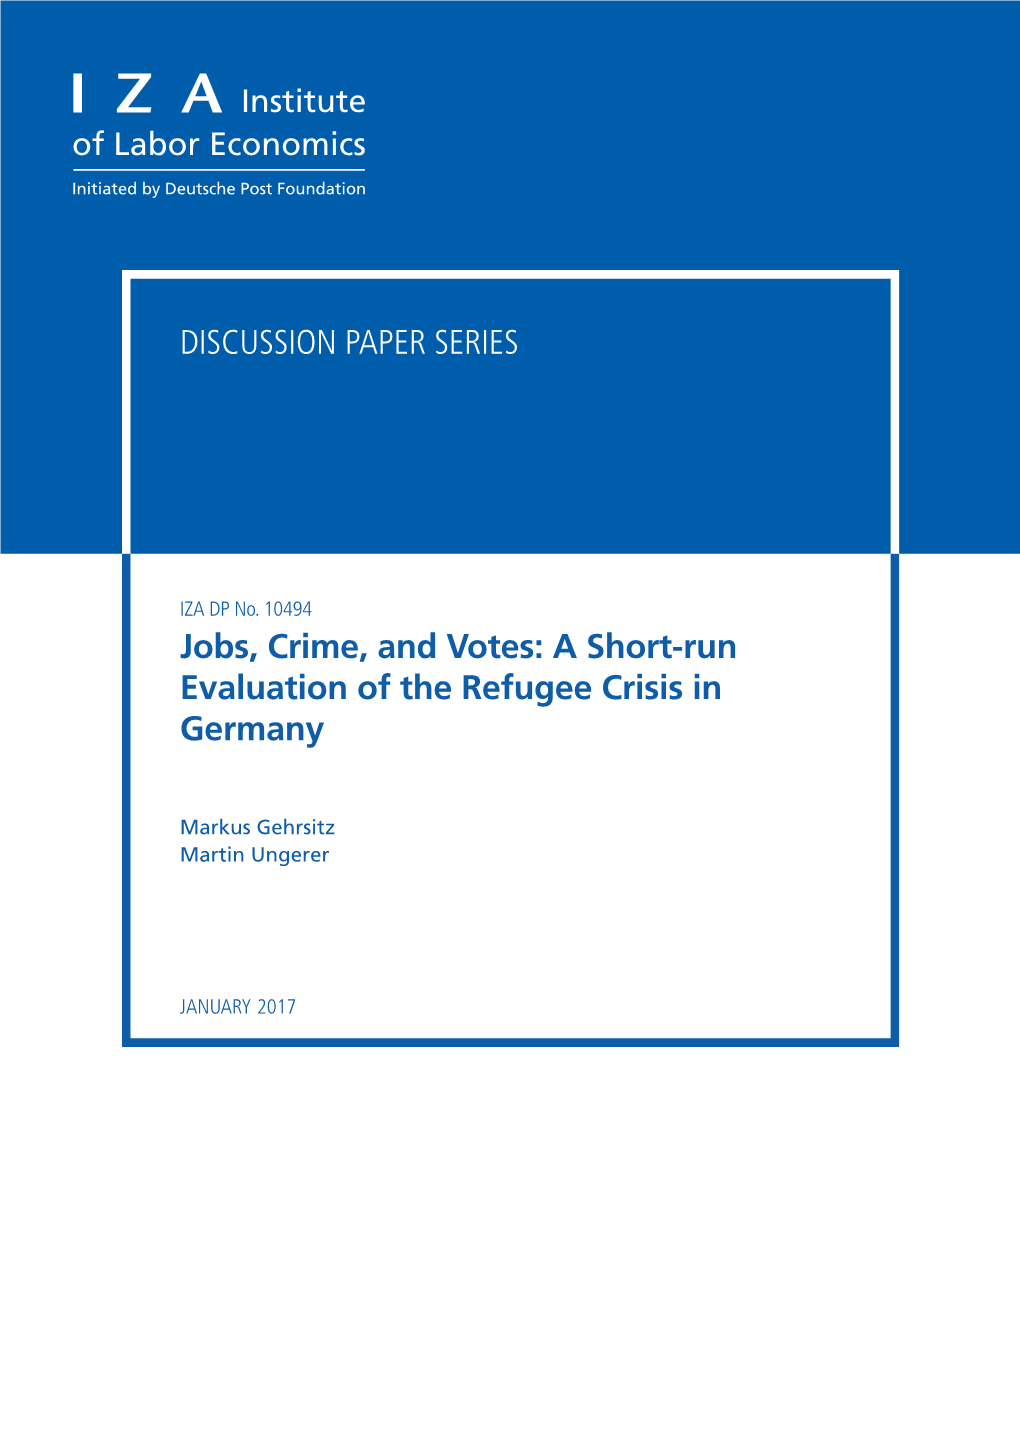 Jobs, Crime, and Votes – a Short-Run Evaluation of the Refugee Crisis In